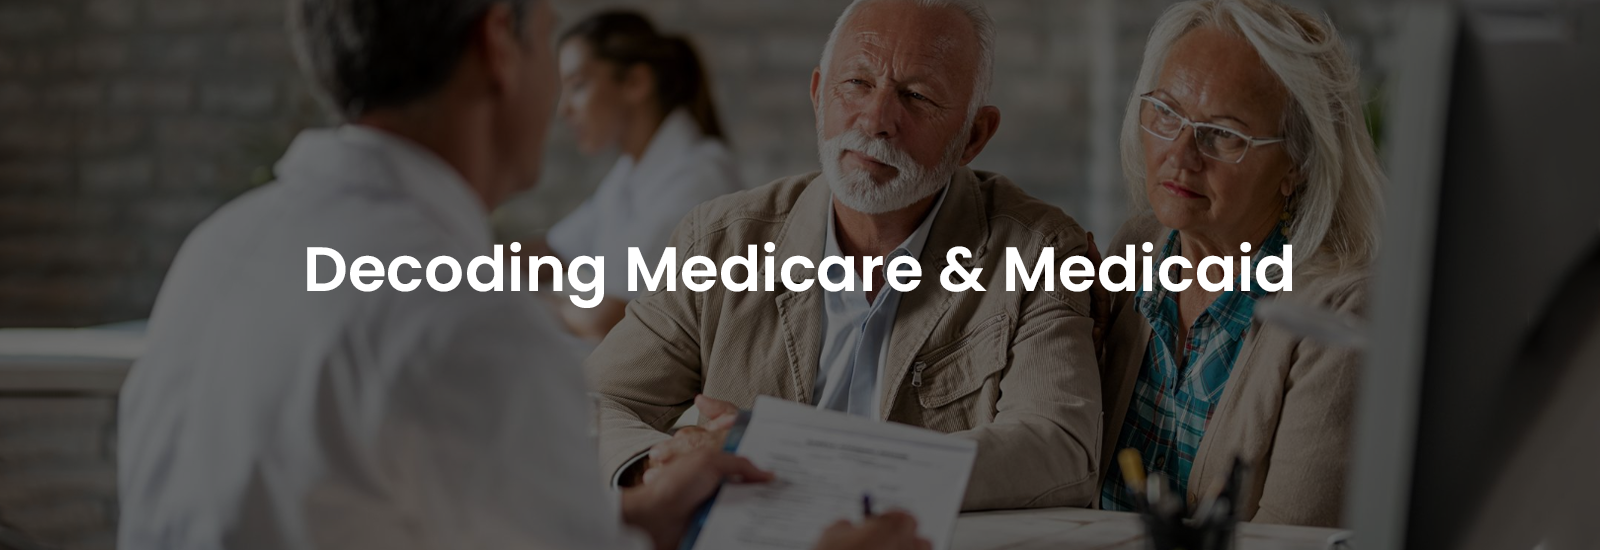 Decoding Medicare and Medicaid | Banner Image